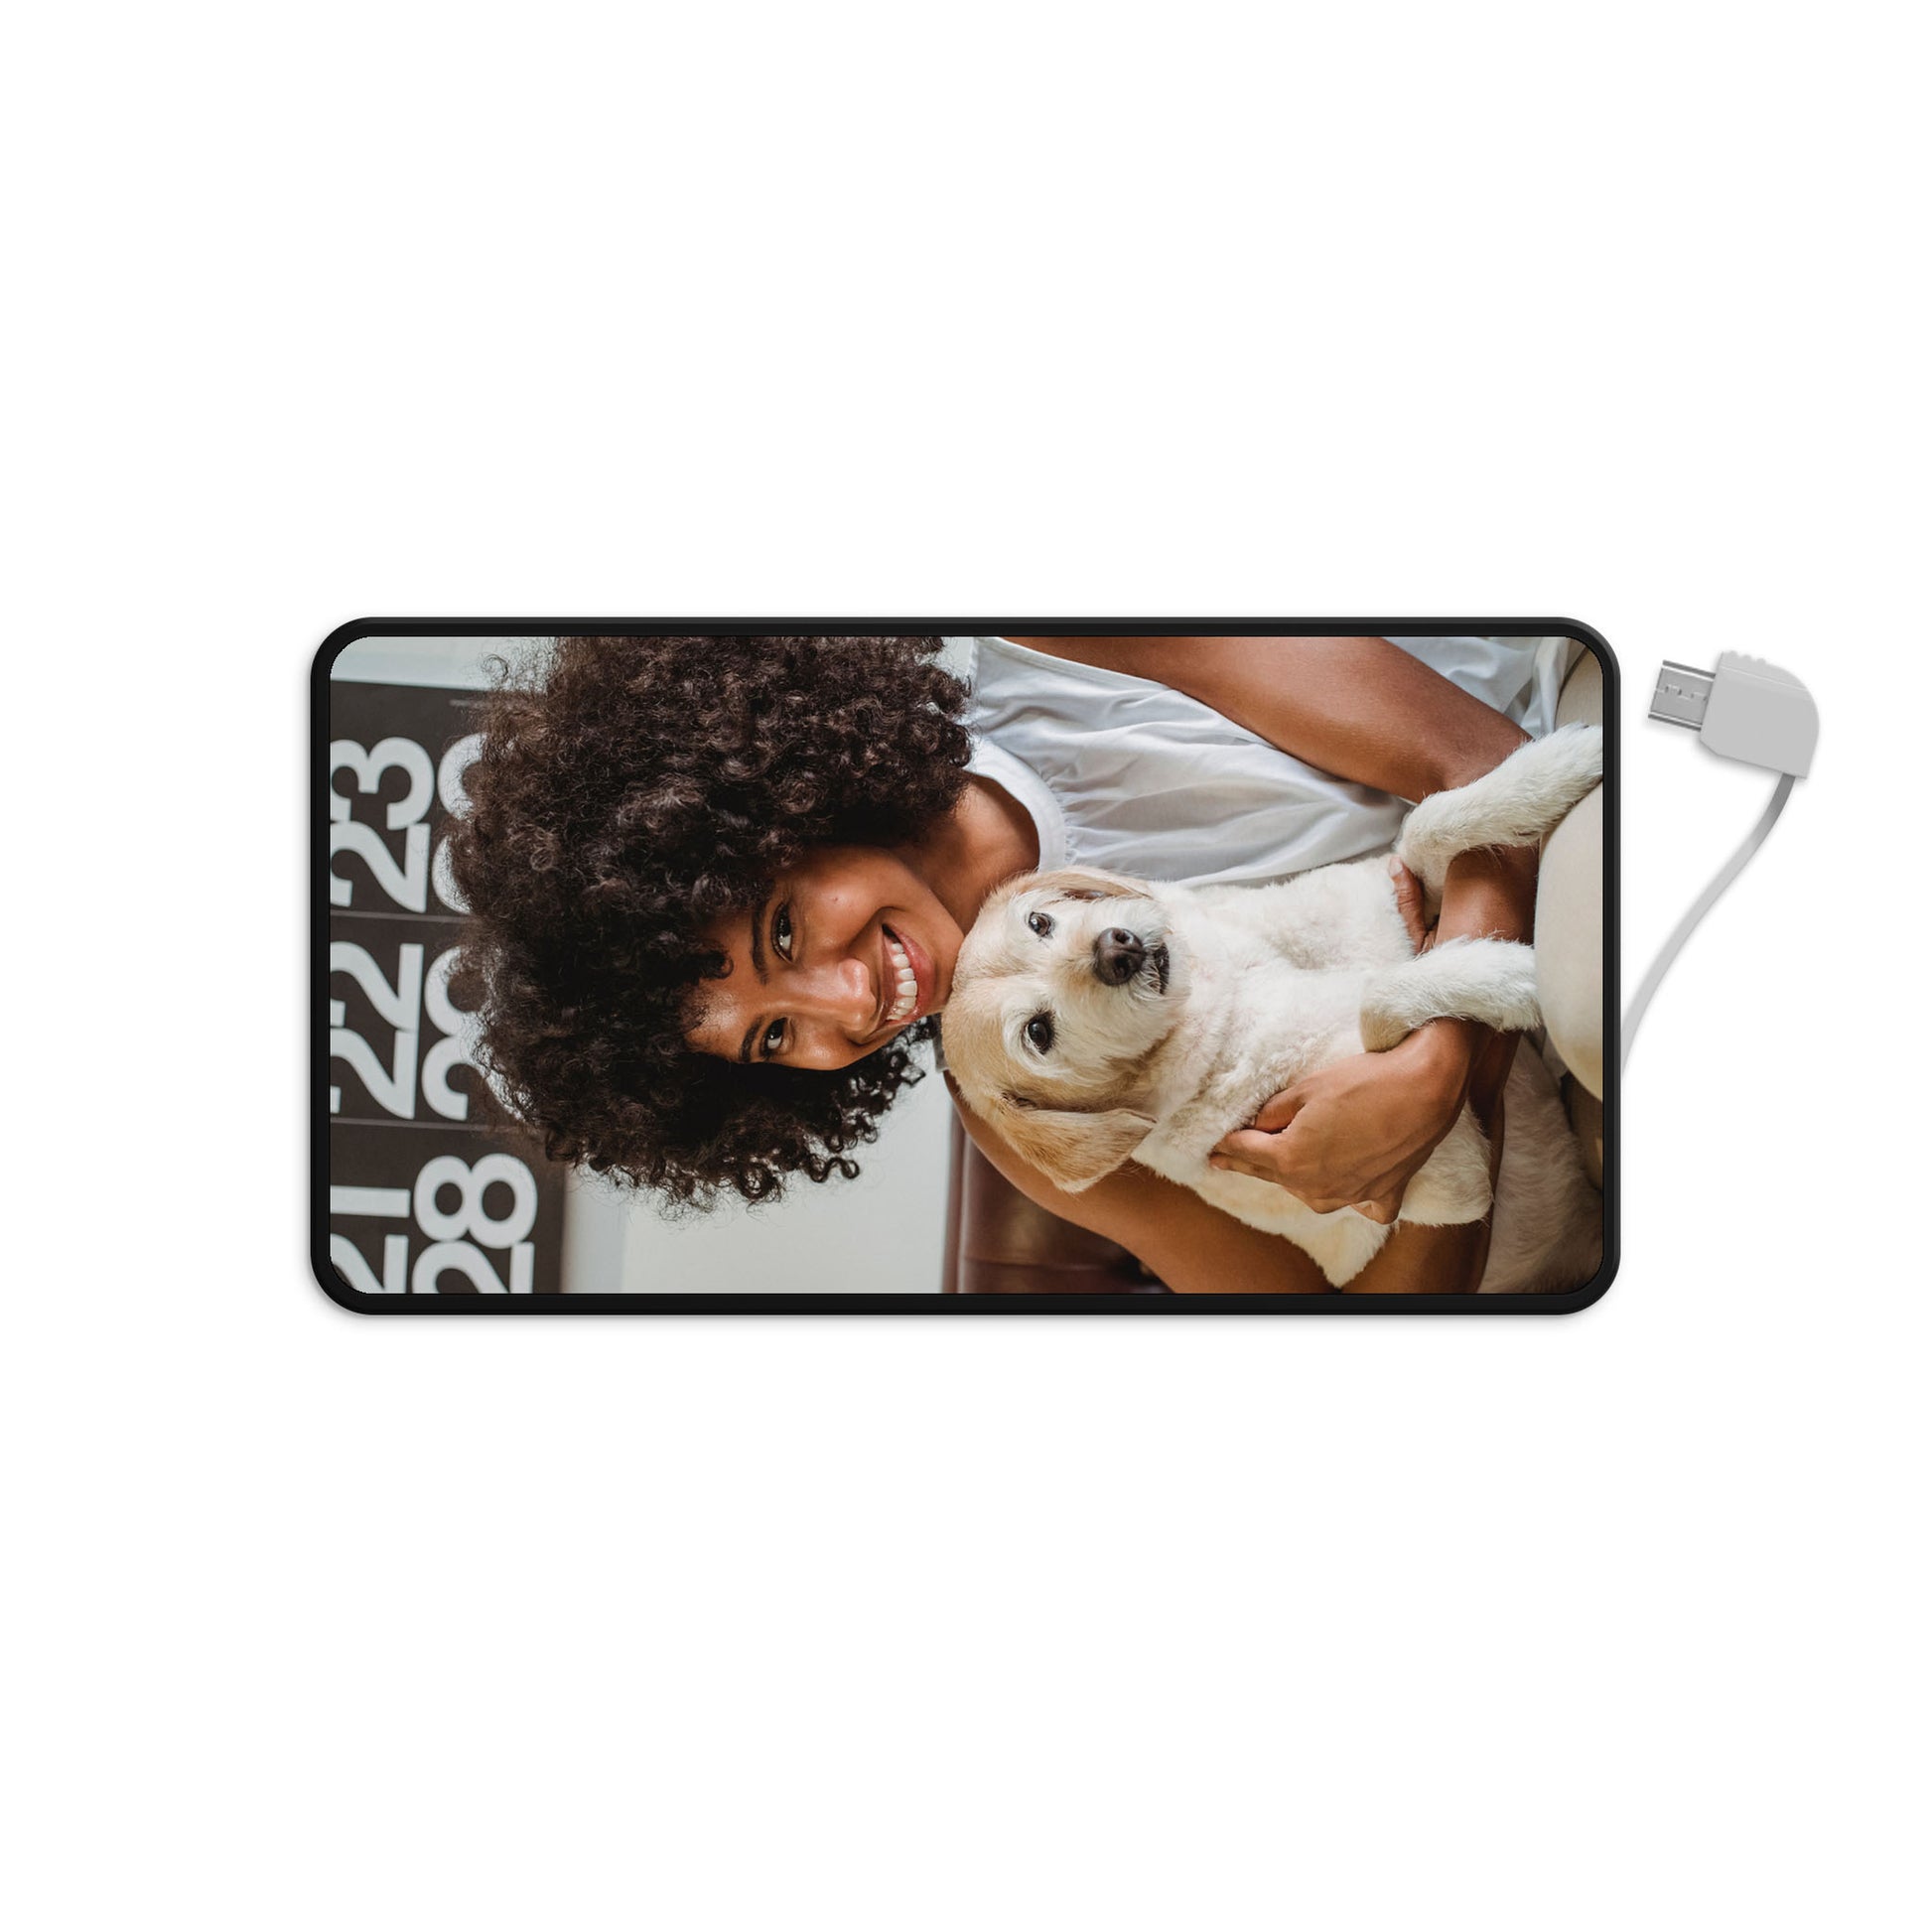 Personalized Power Bank - Photo Personalized Power Bank 